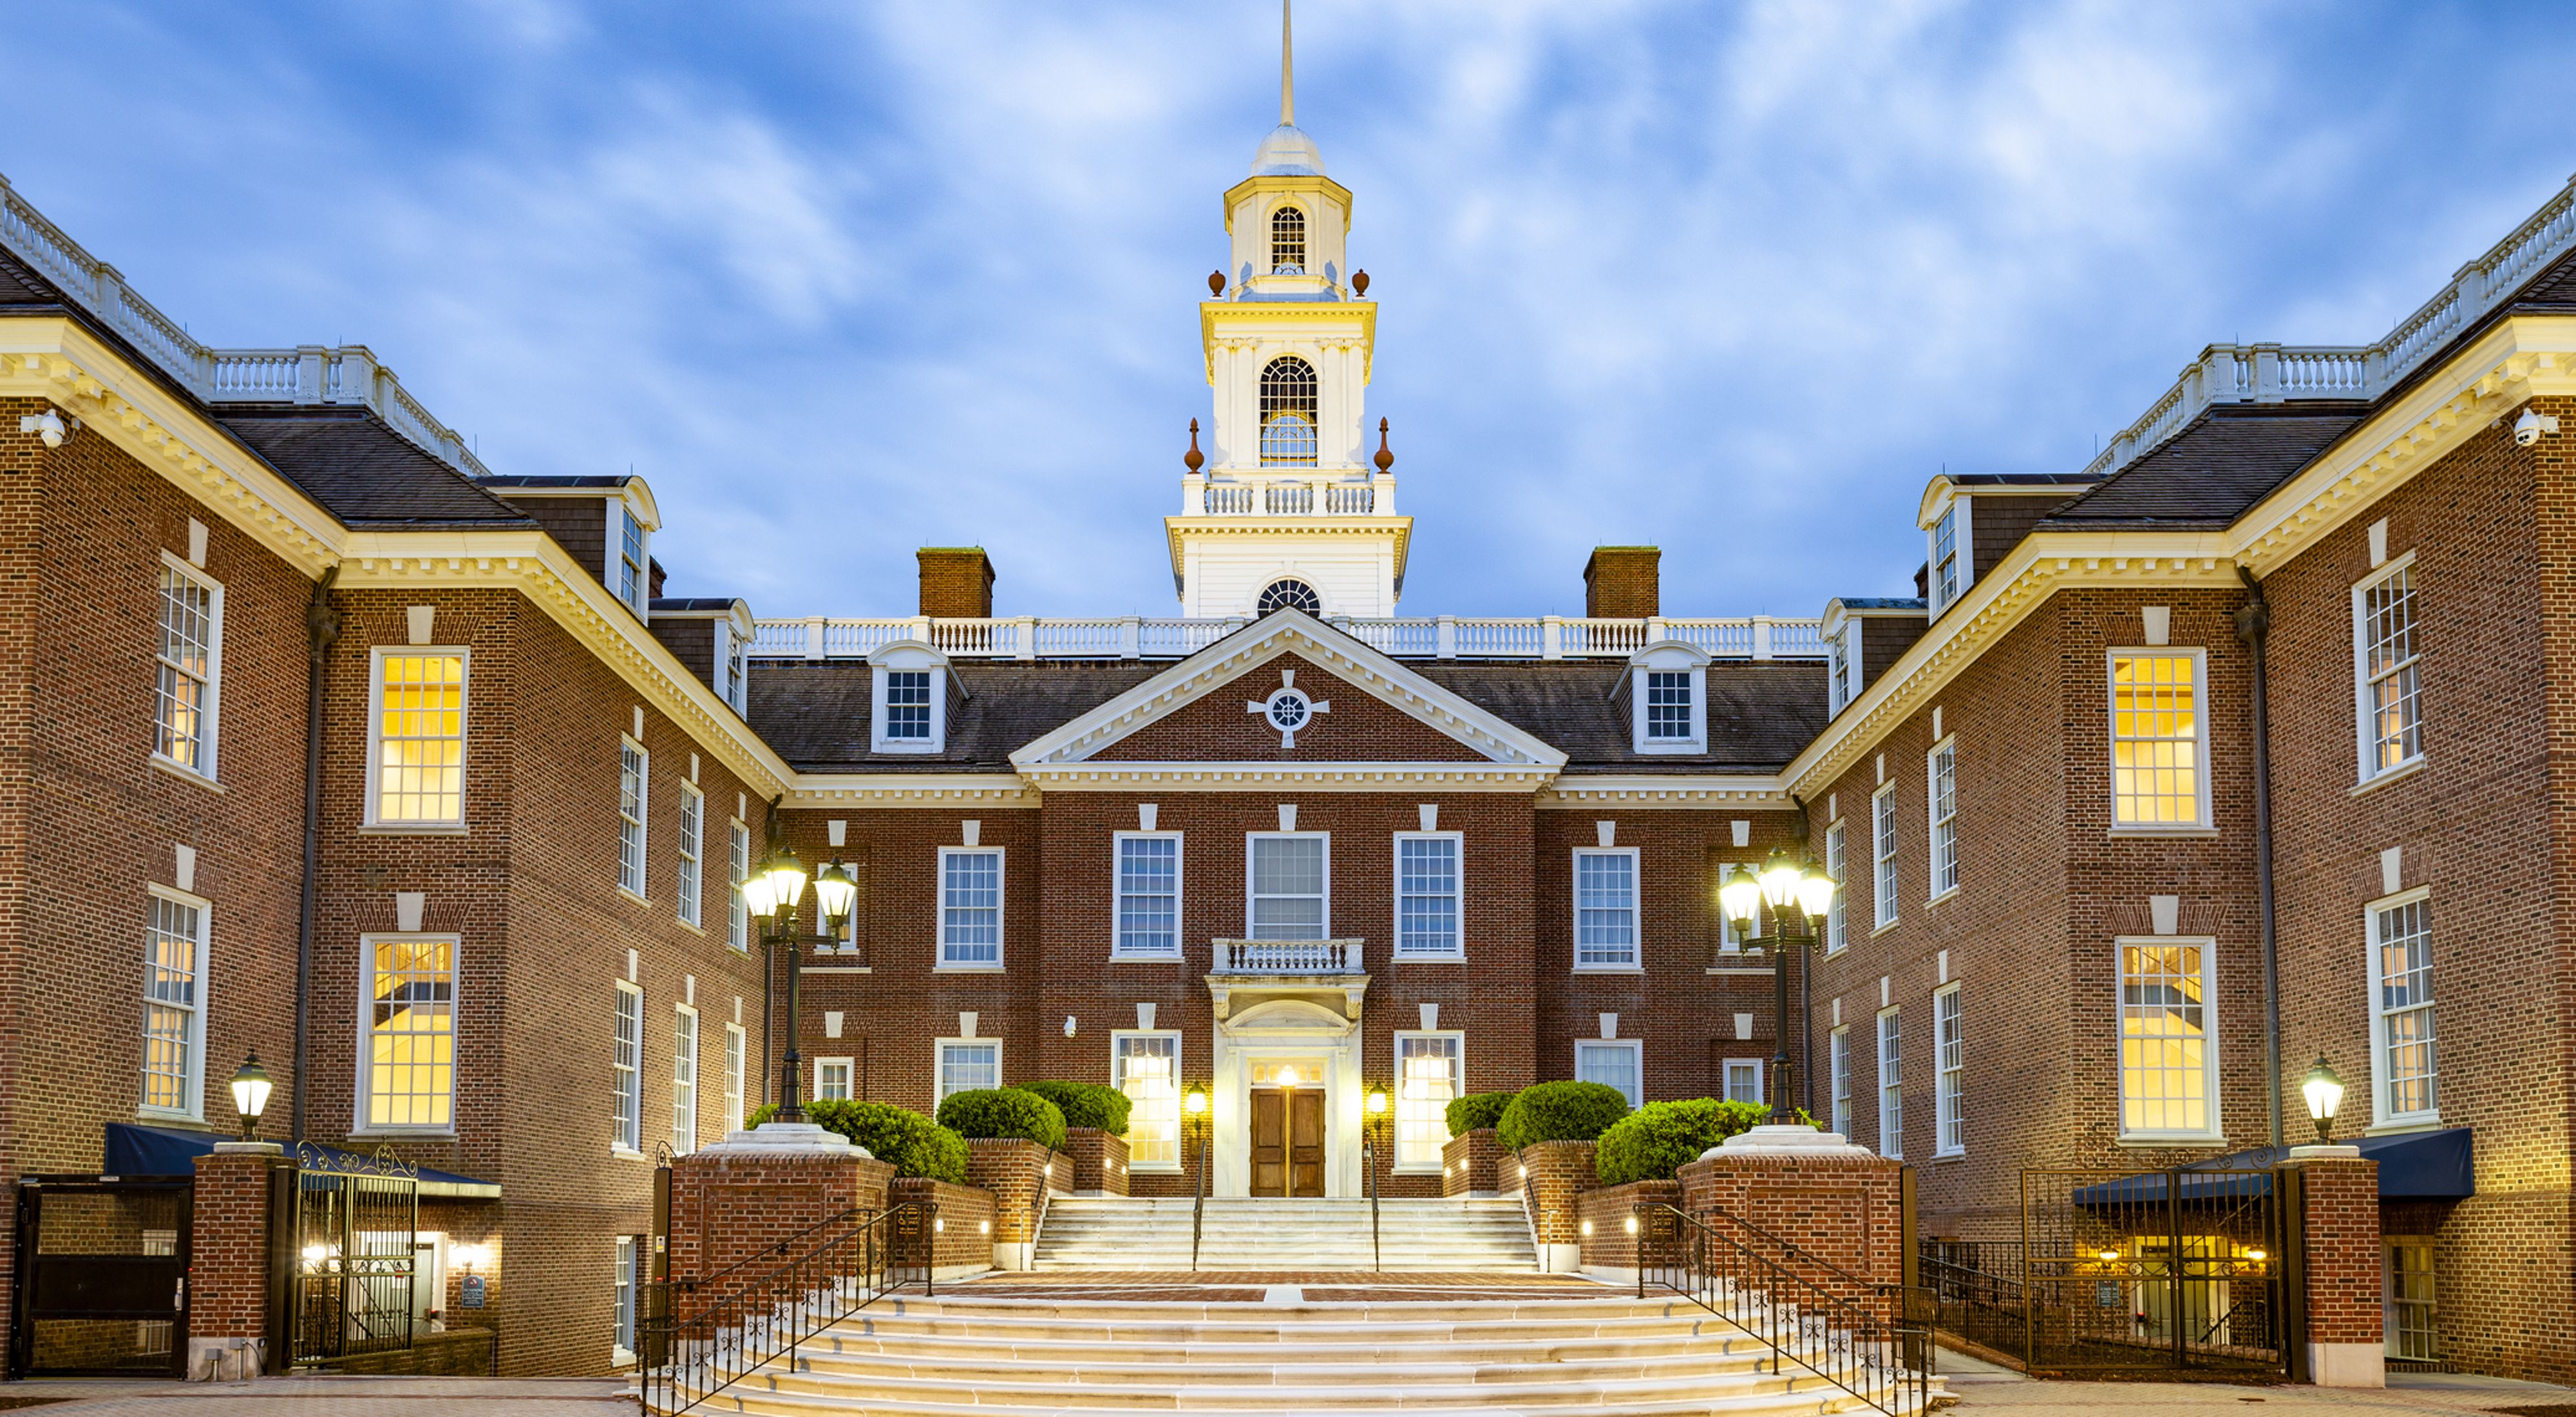 Dramatic view of the Delaware state capitol building. White clouds hang low over the colonial style state house that features a tall spire rising above the front entrance.